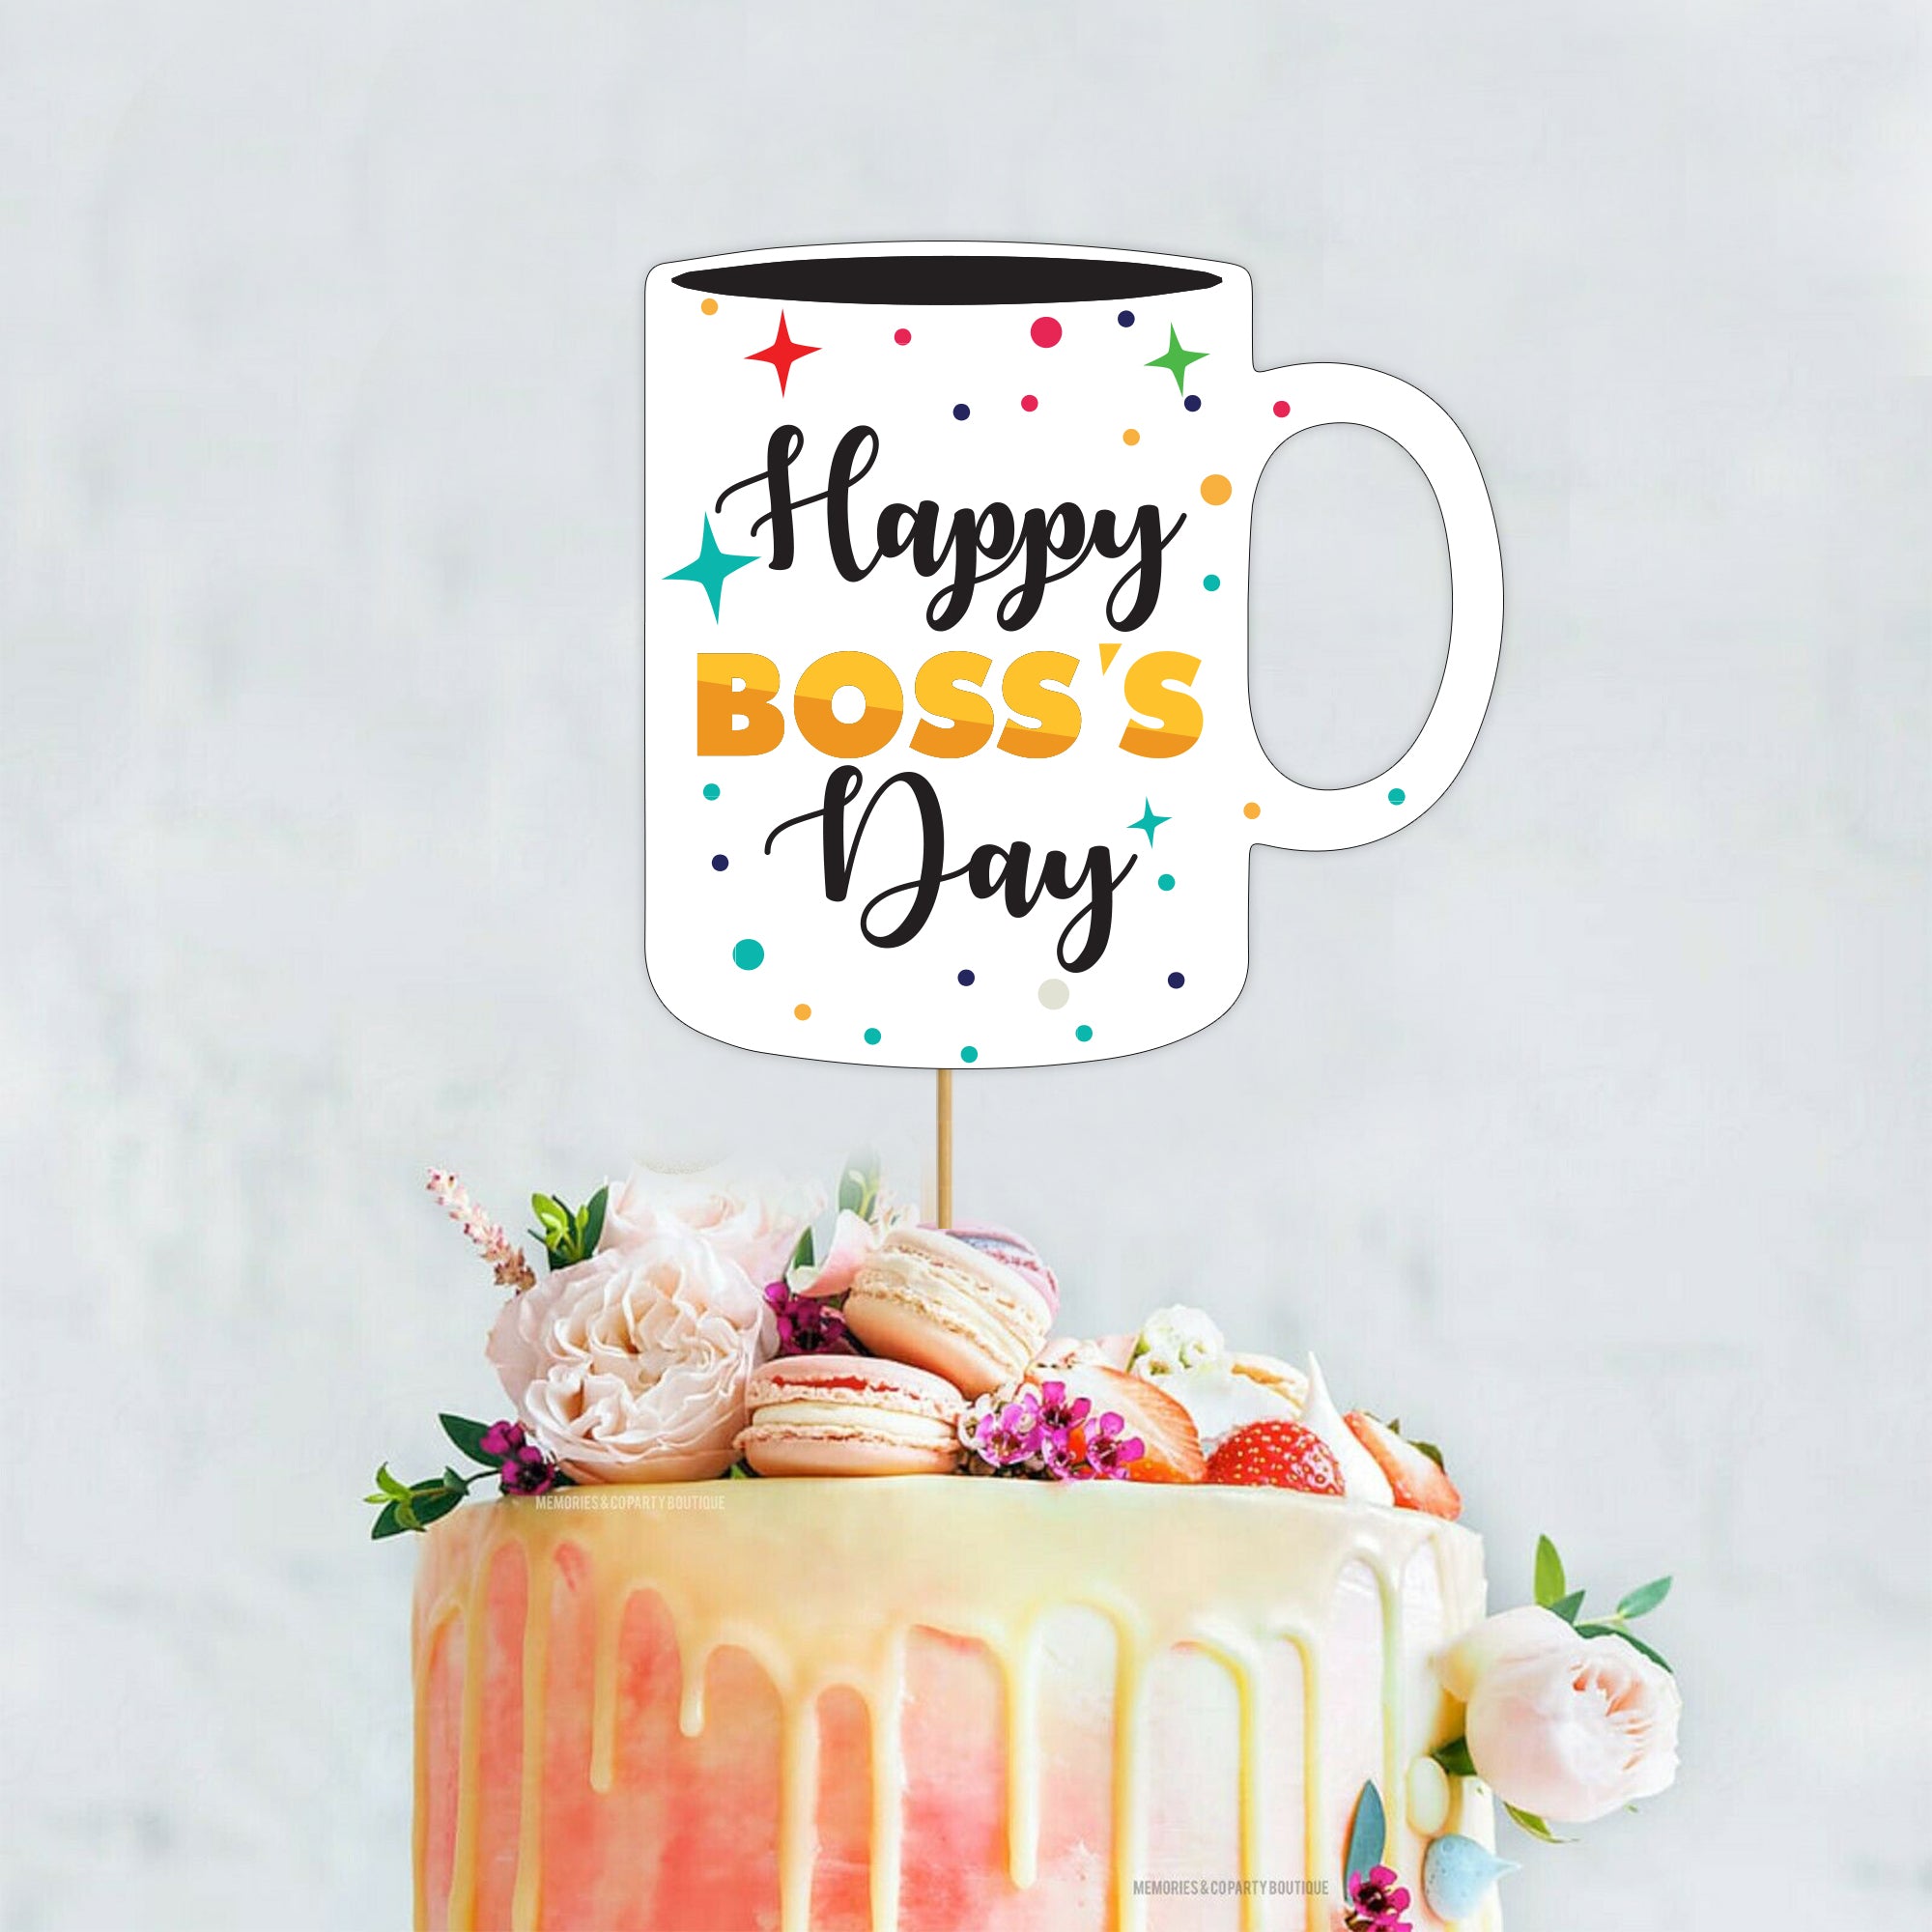 Workaholic BOSS Theme Cake Delivery in Delhi NCR - ₹3,799.00 Cake Express